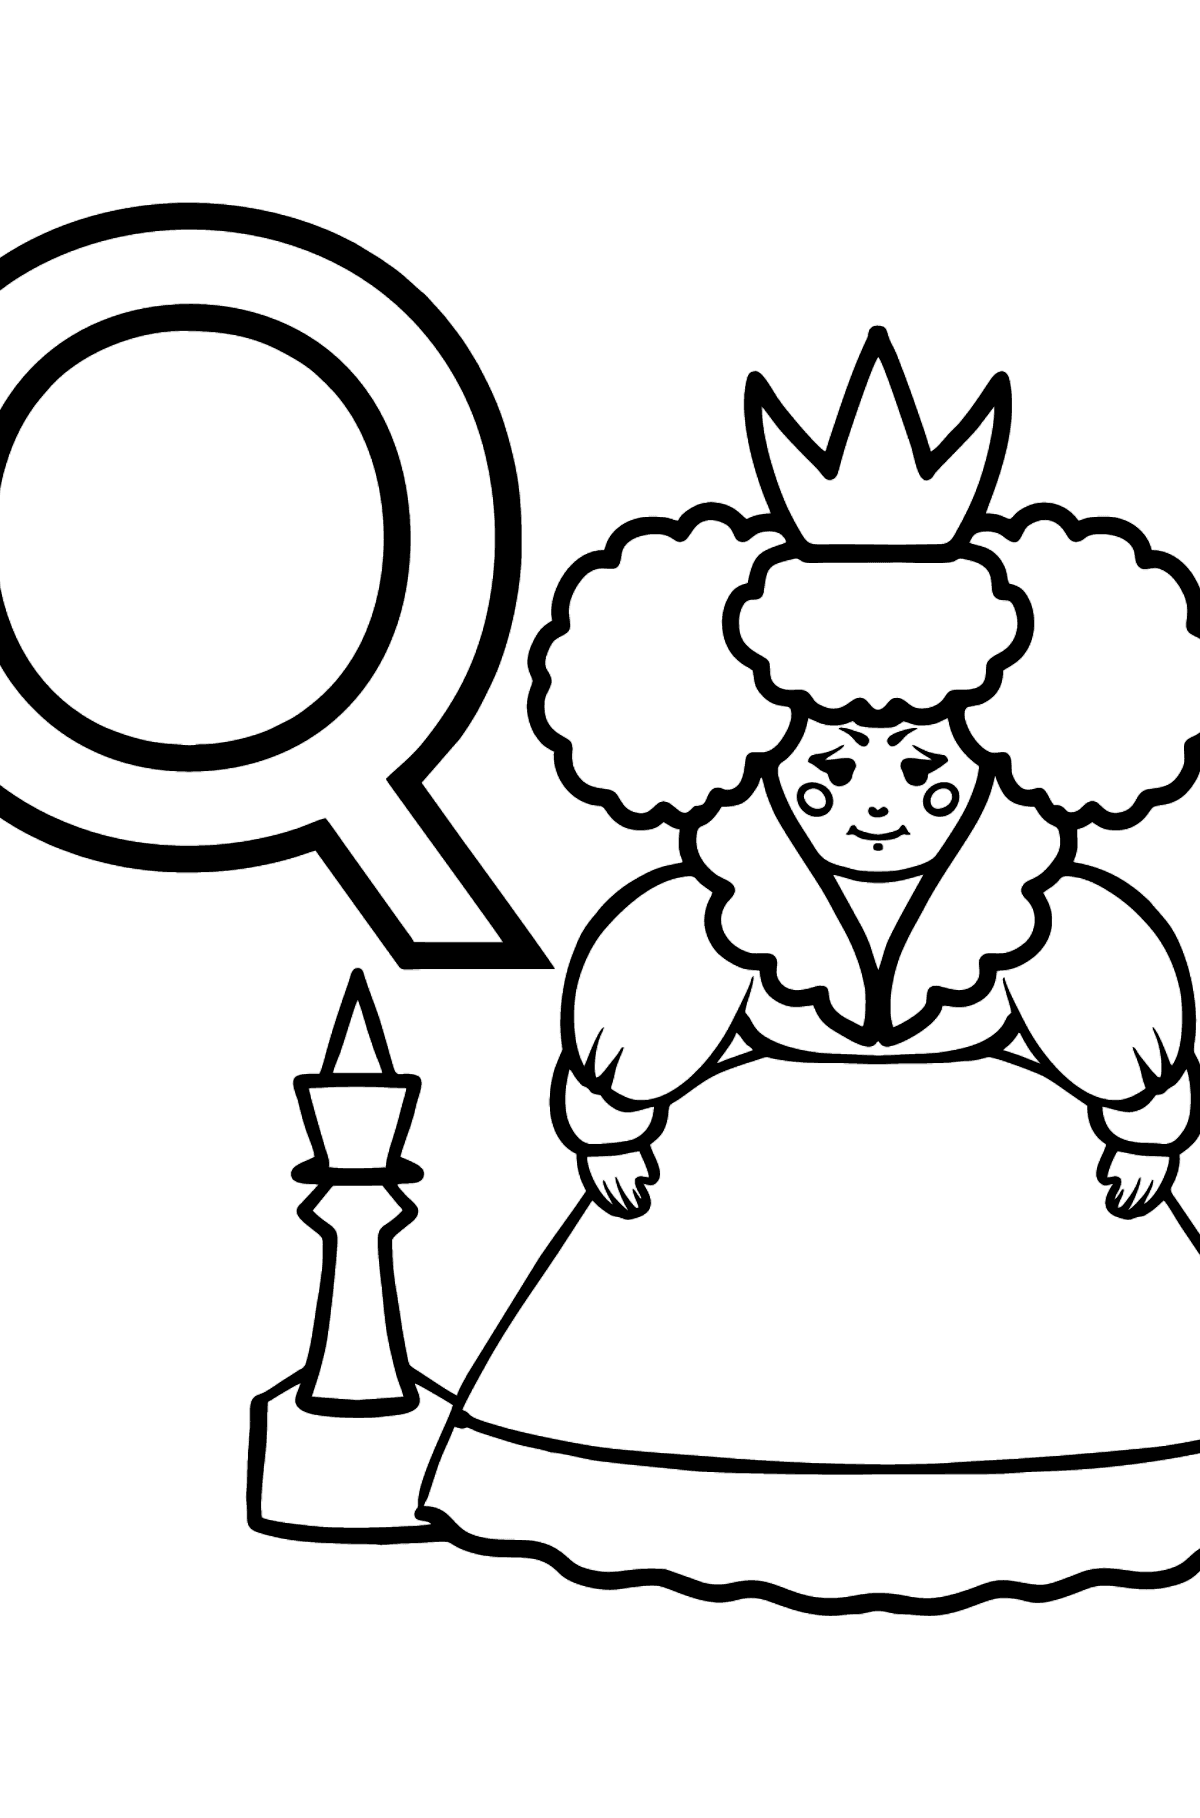 English Letter Q coloring pages - QUEEN - Coloring Pages for Kids